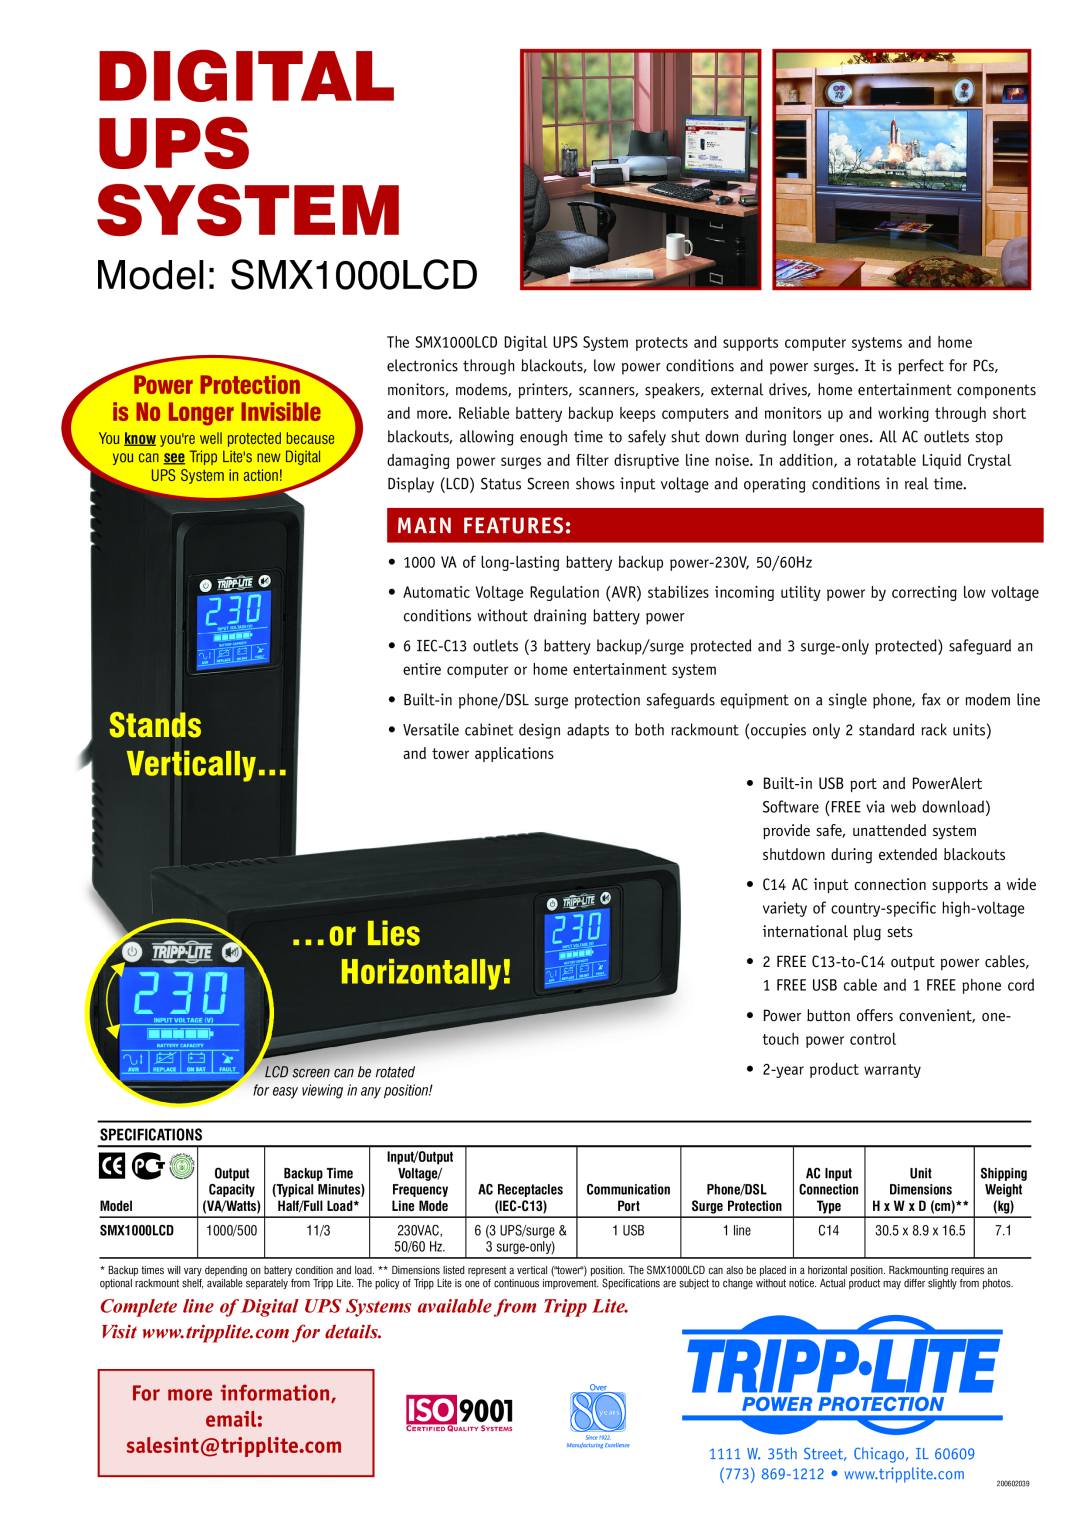 Tripp Lite warranty Digital Ups System, Model SMX1000LCD, Vertically, or Lies, Horizontally, Stands, Main Features 